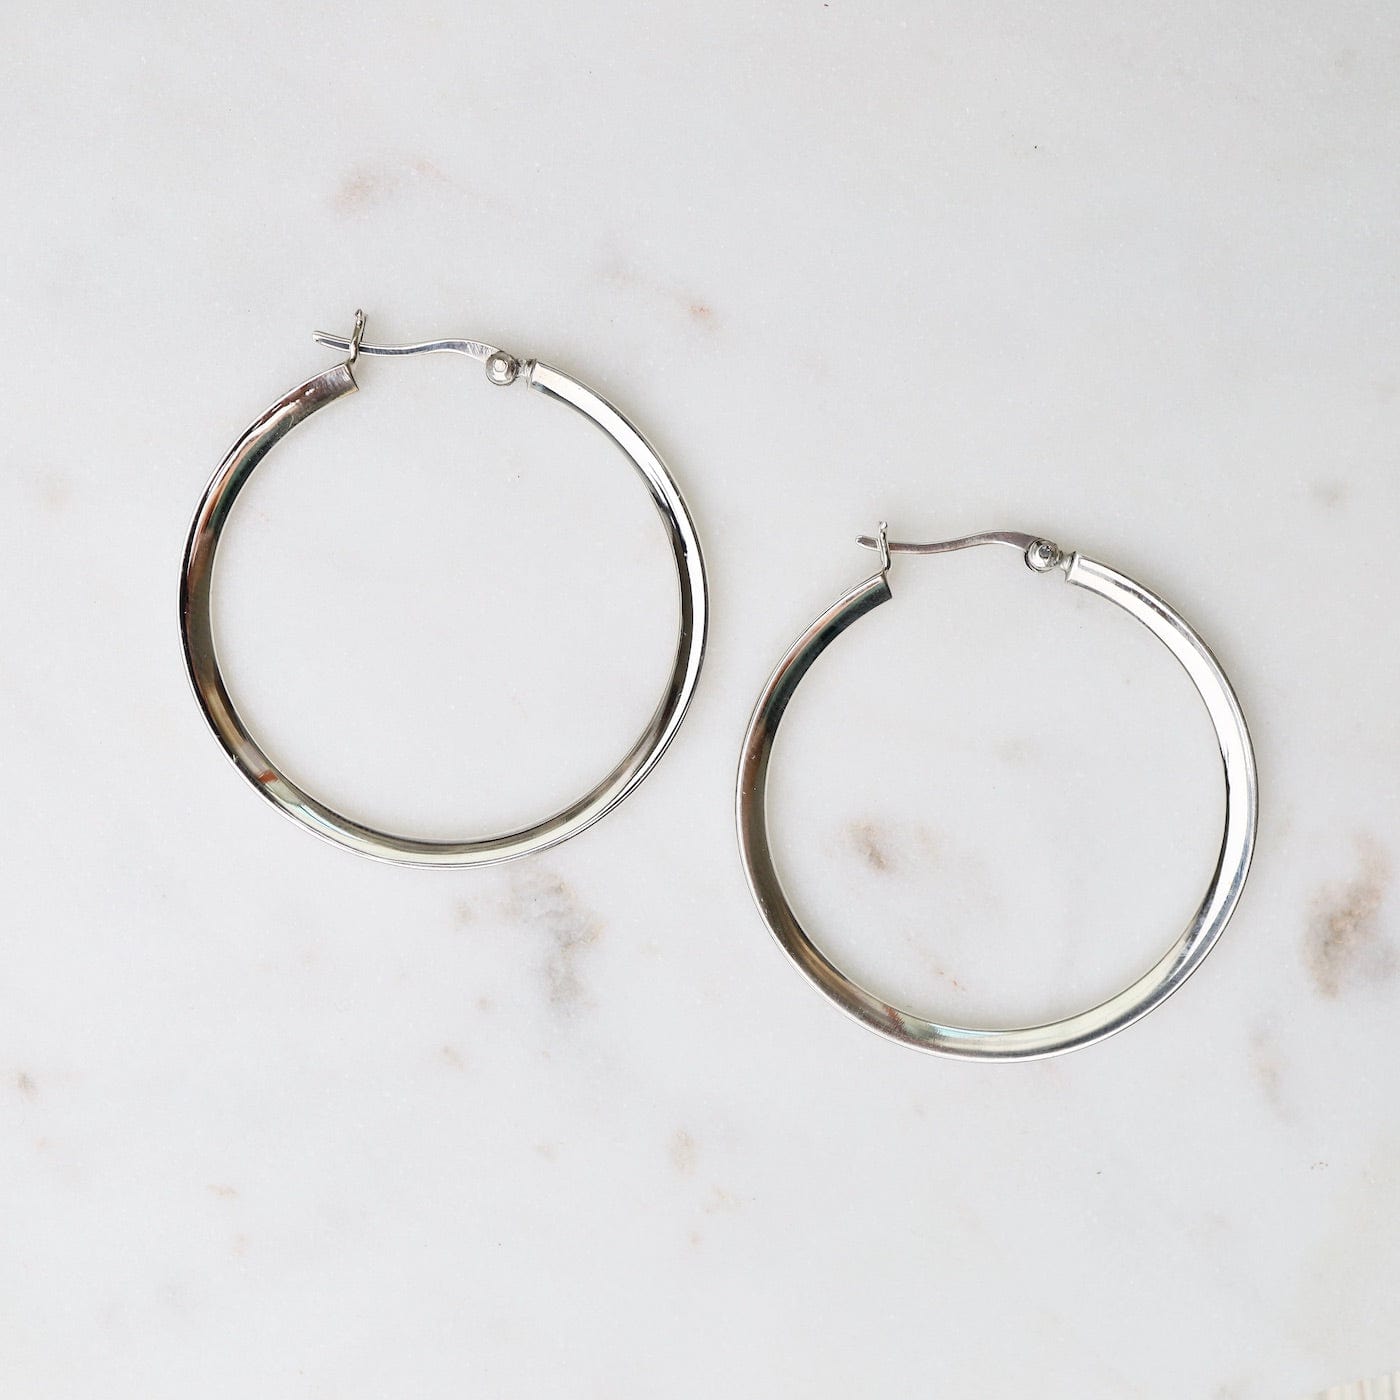 EAR 40mm Square Hoops